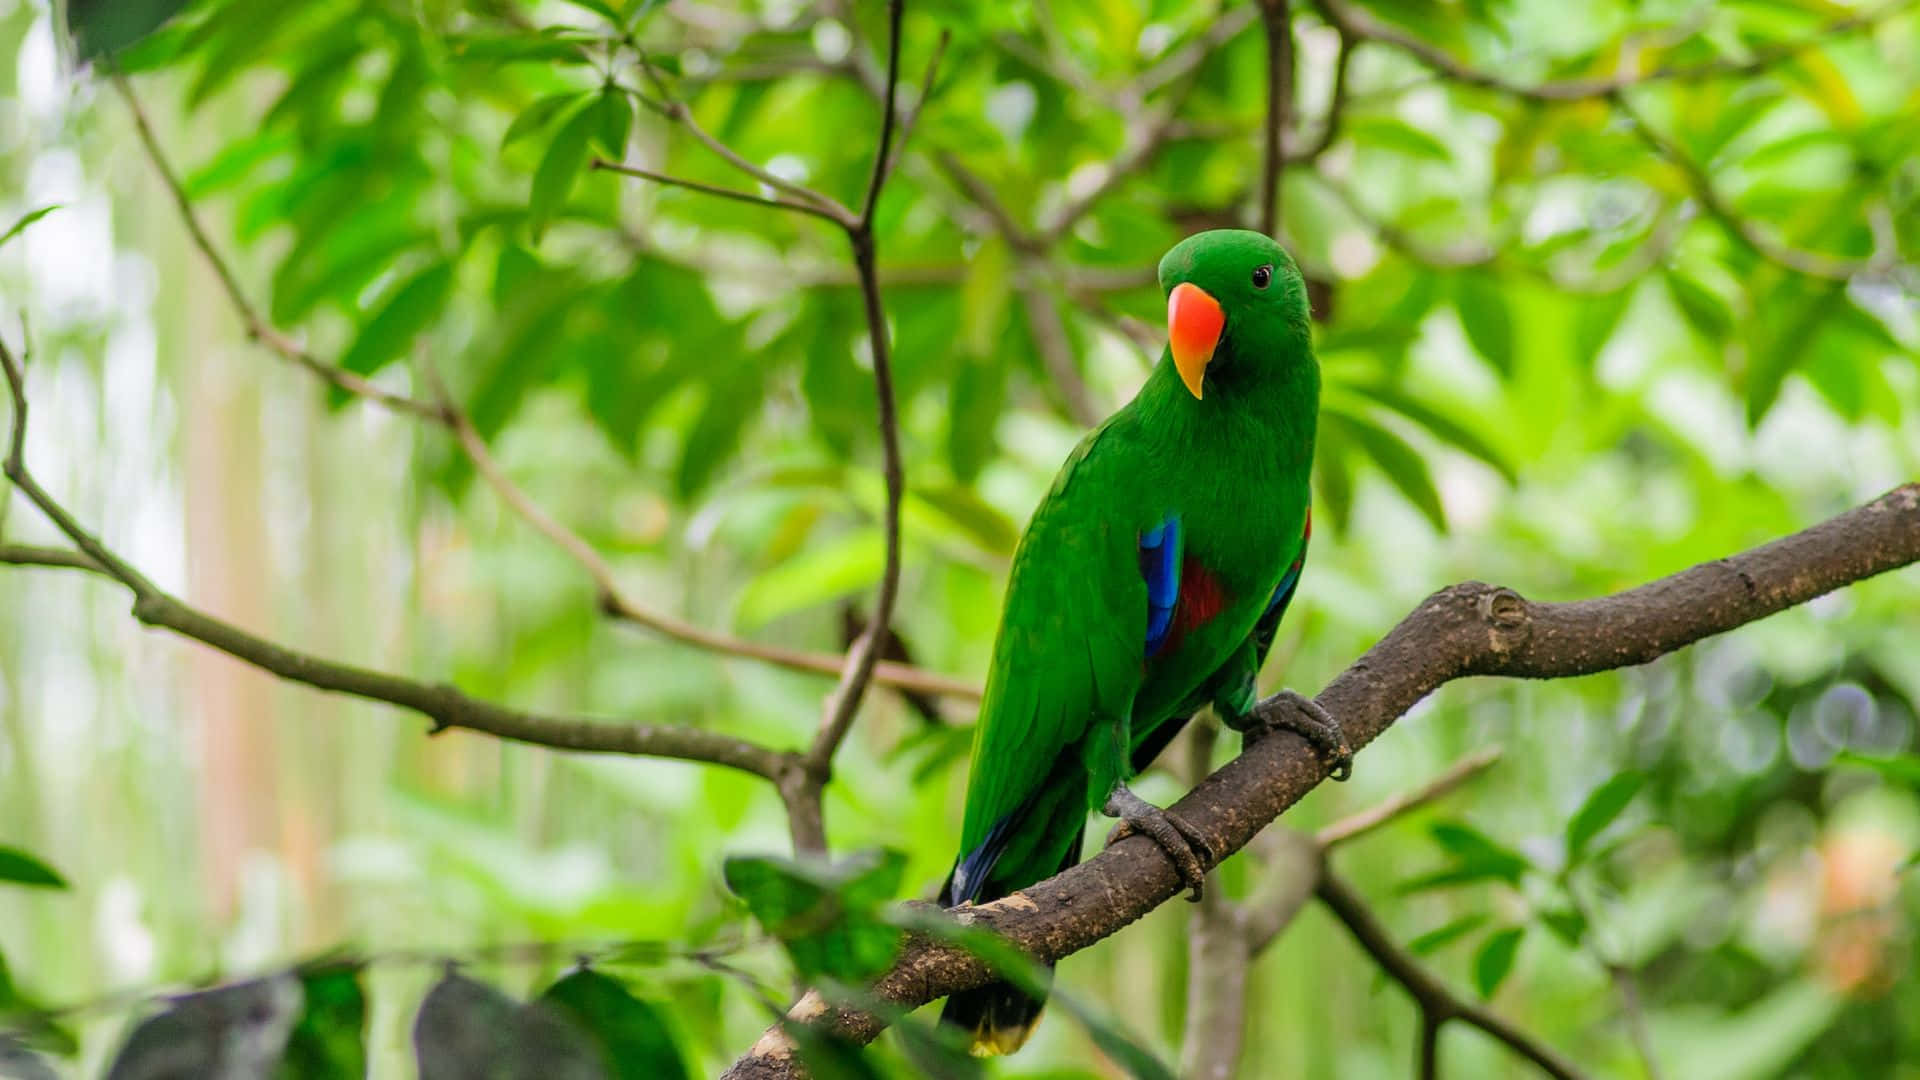 A vibrant parrot with its dazzling plumage